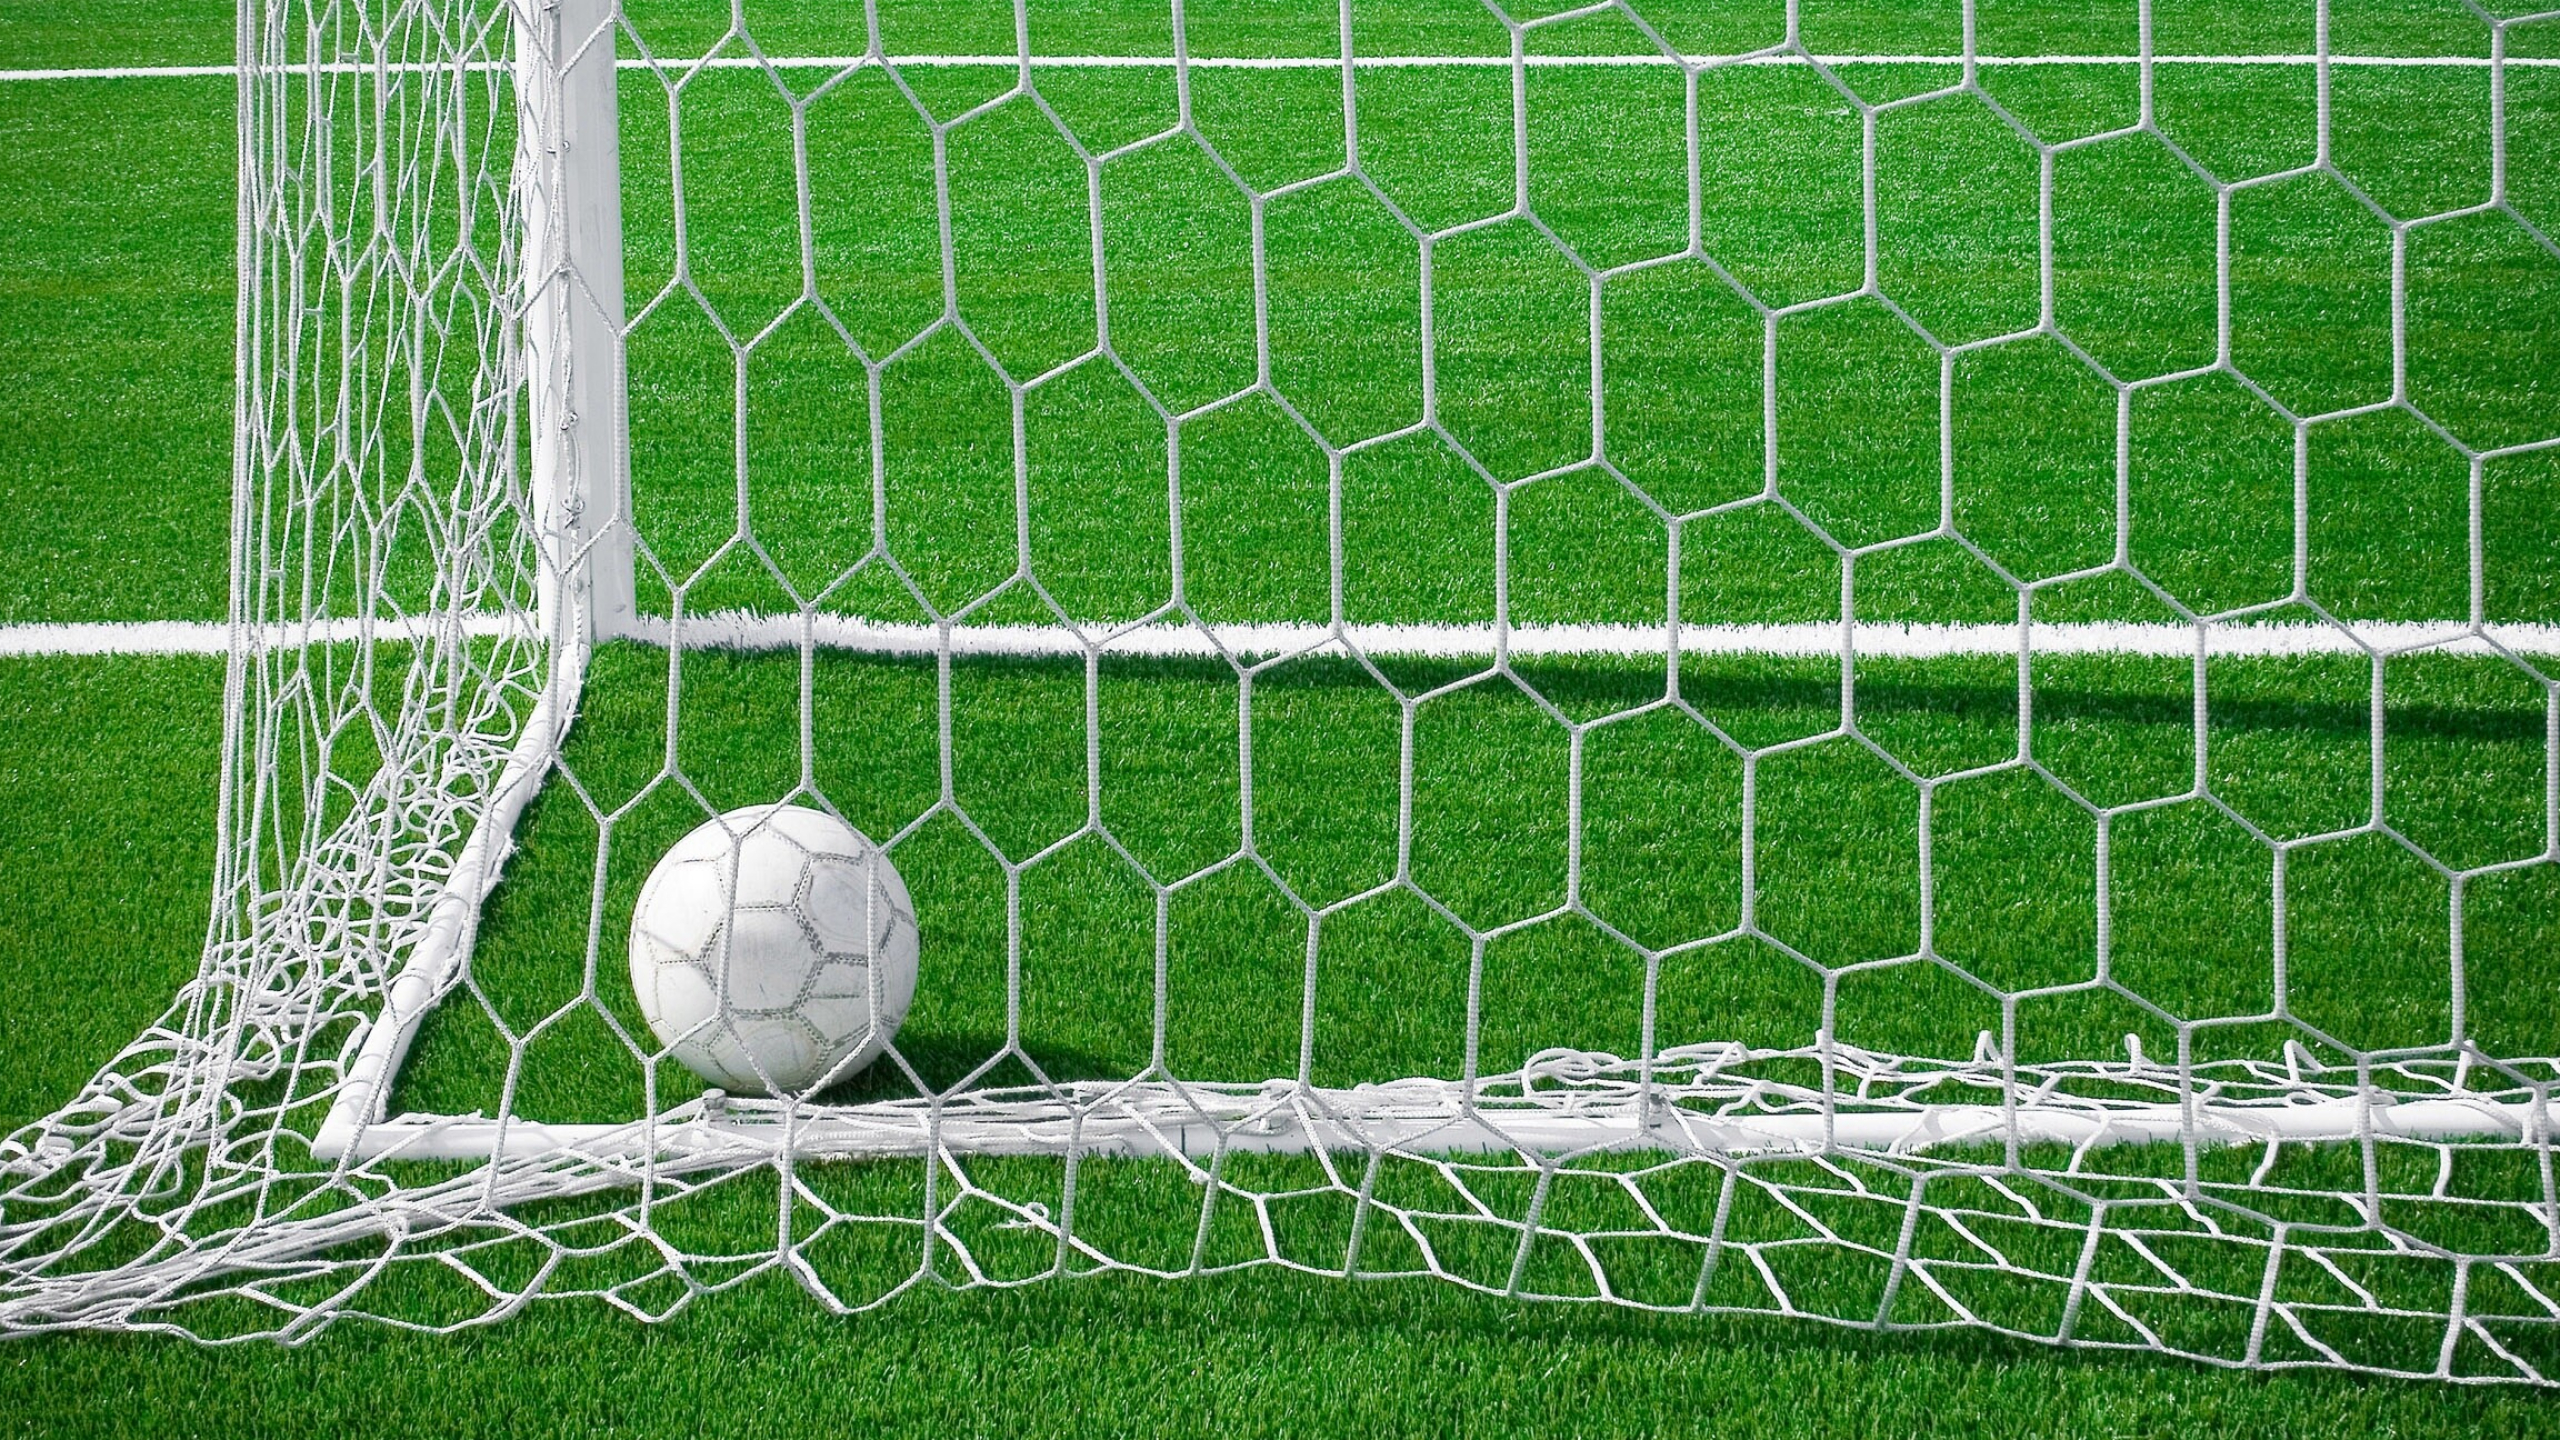 Goal (Sports): The goal post nets, Made of #21 200 Lb. test nylon netting, A net attached behind the goal frame. 2560x1440 HD Background.